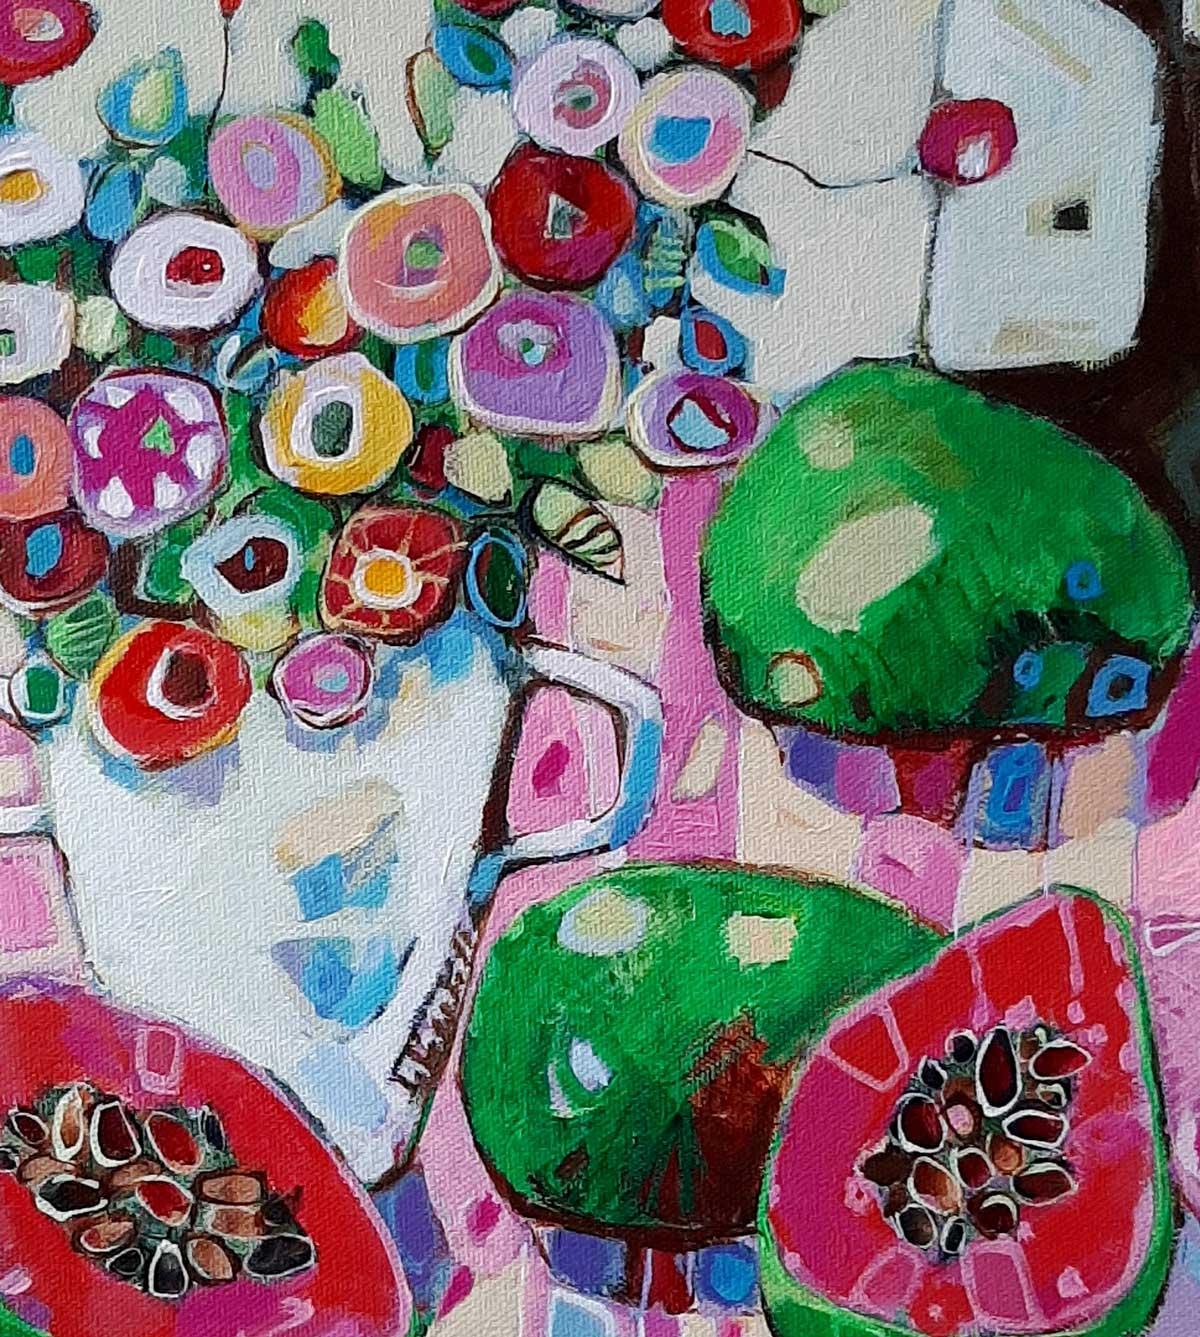 Papaya - Colourful, Patterned Still Life / Fruit & Flowers: Acrylic on Canvas - Painting by Ania Pieniazek